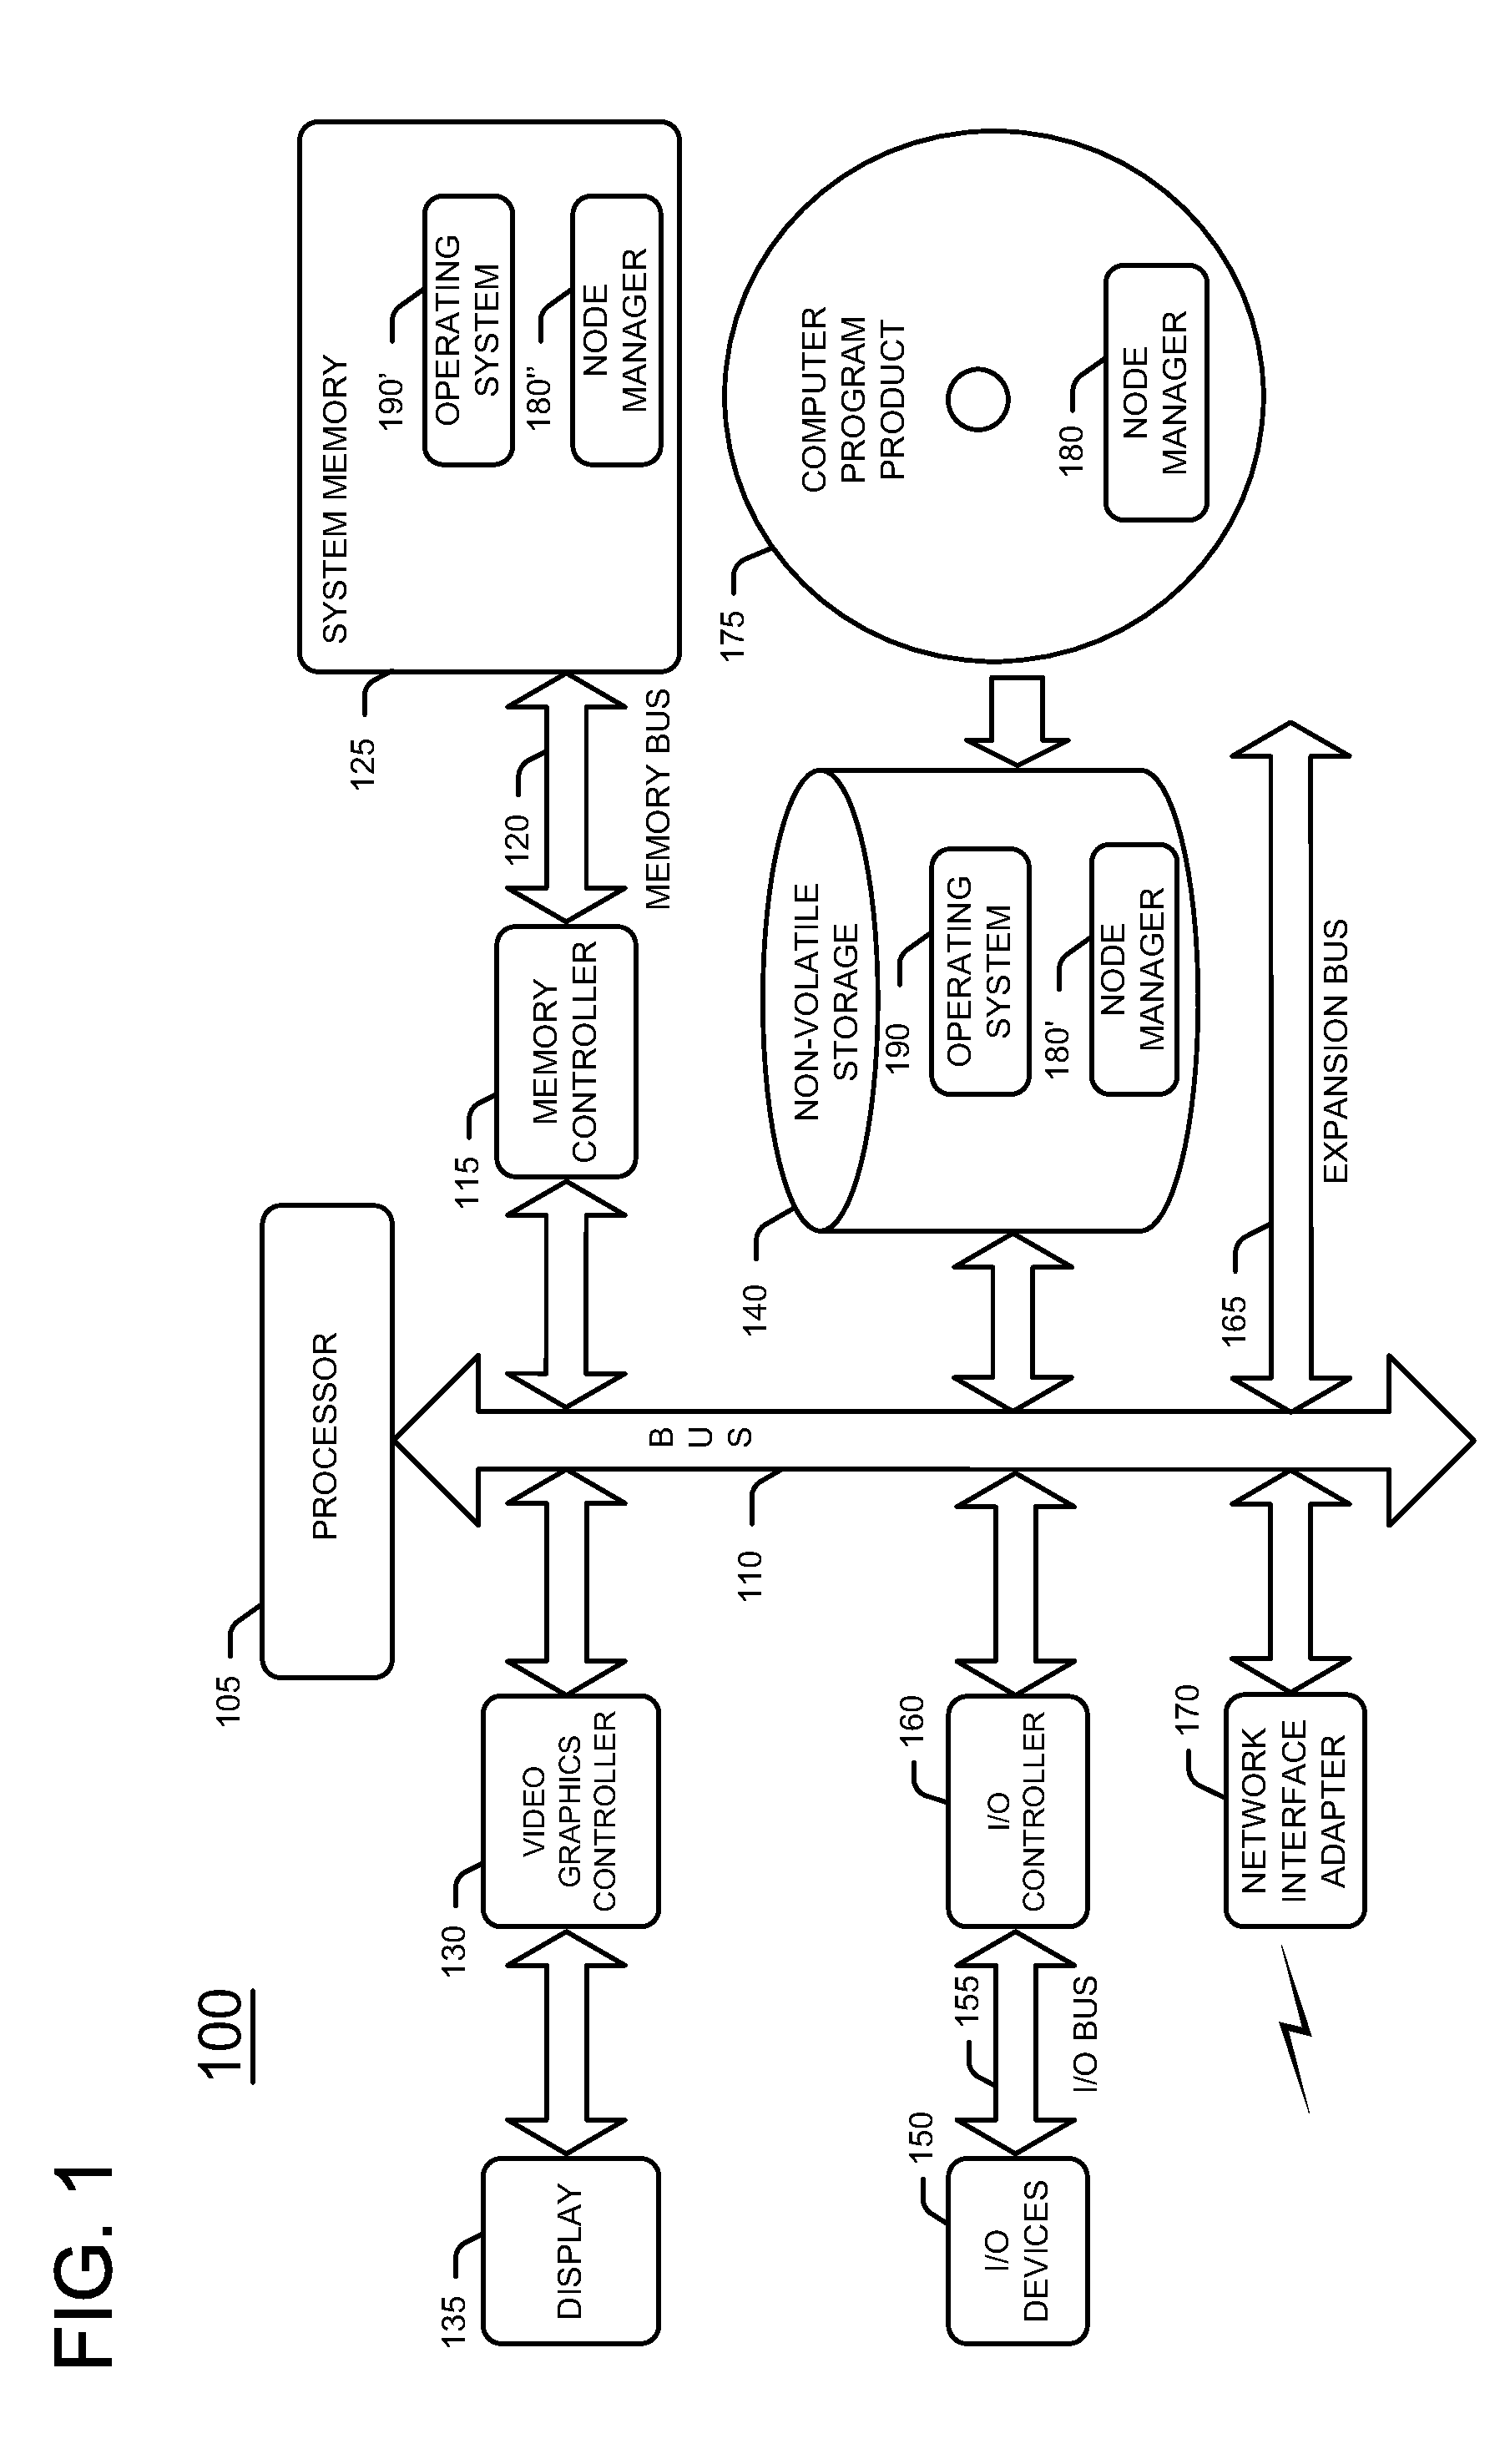 Node controller first failure error management for a distributed system